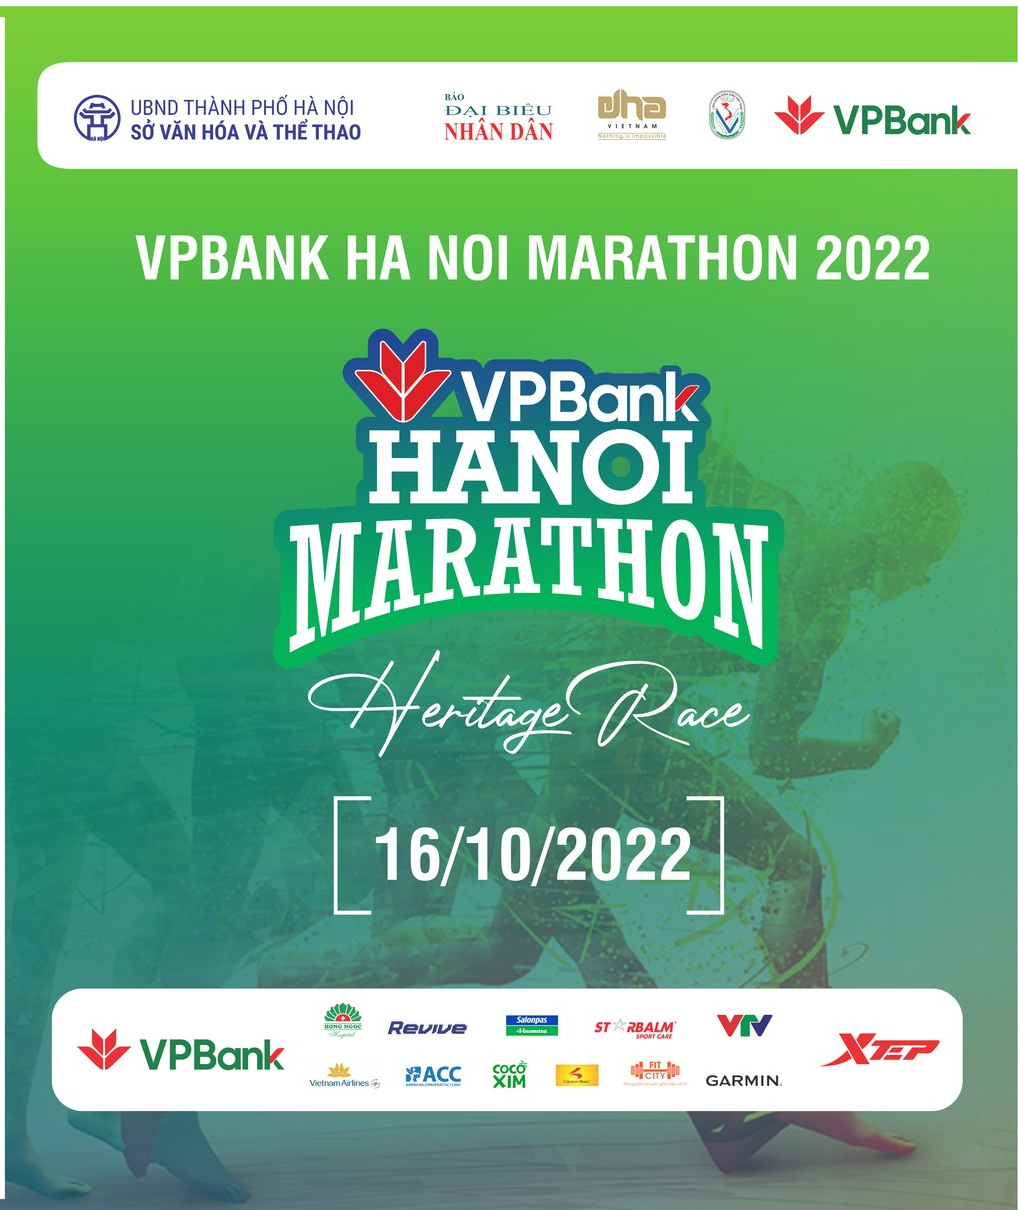 News Release: Some 10,000 Runners to Compete in VPBank Hanoi Marathon 2022